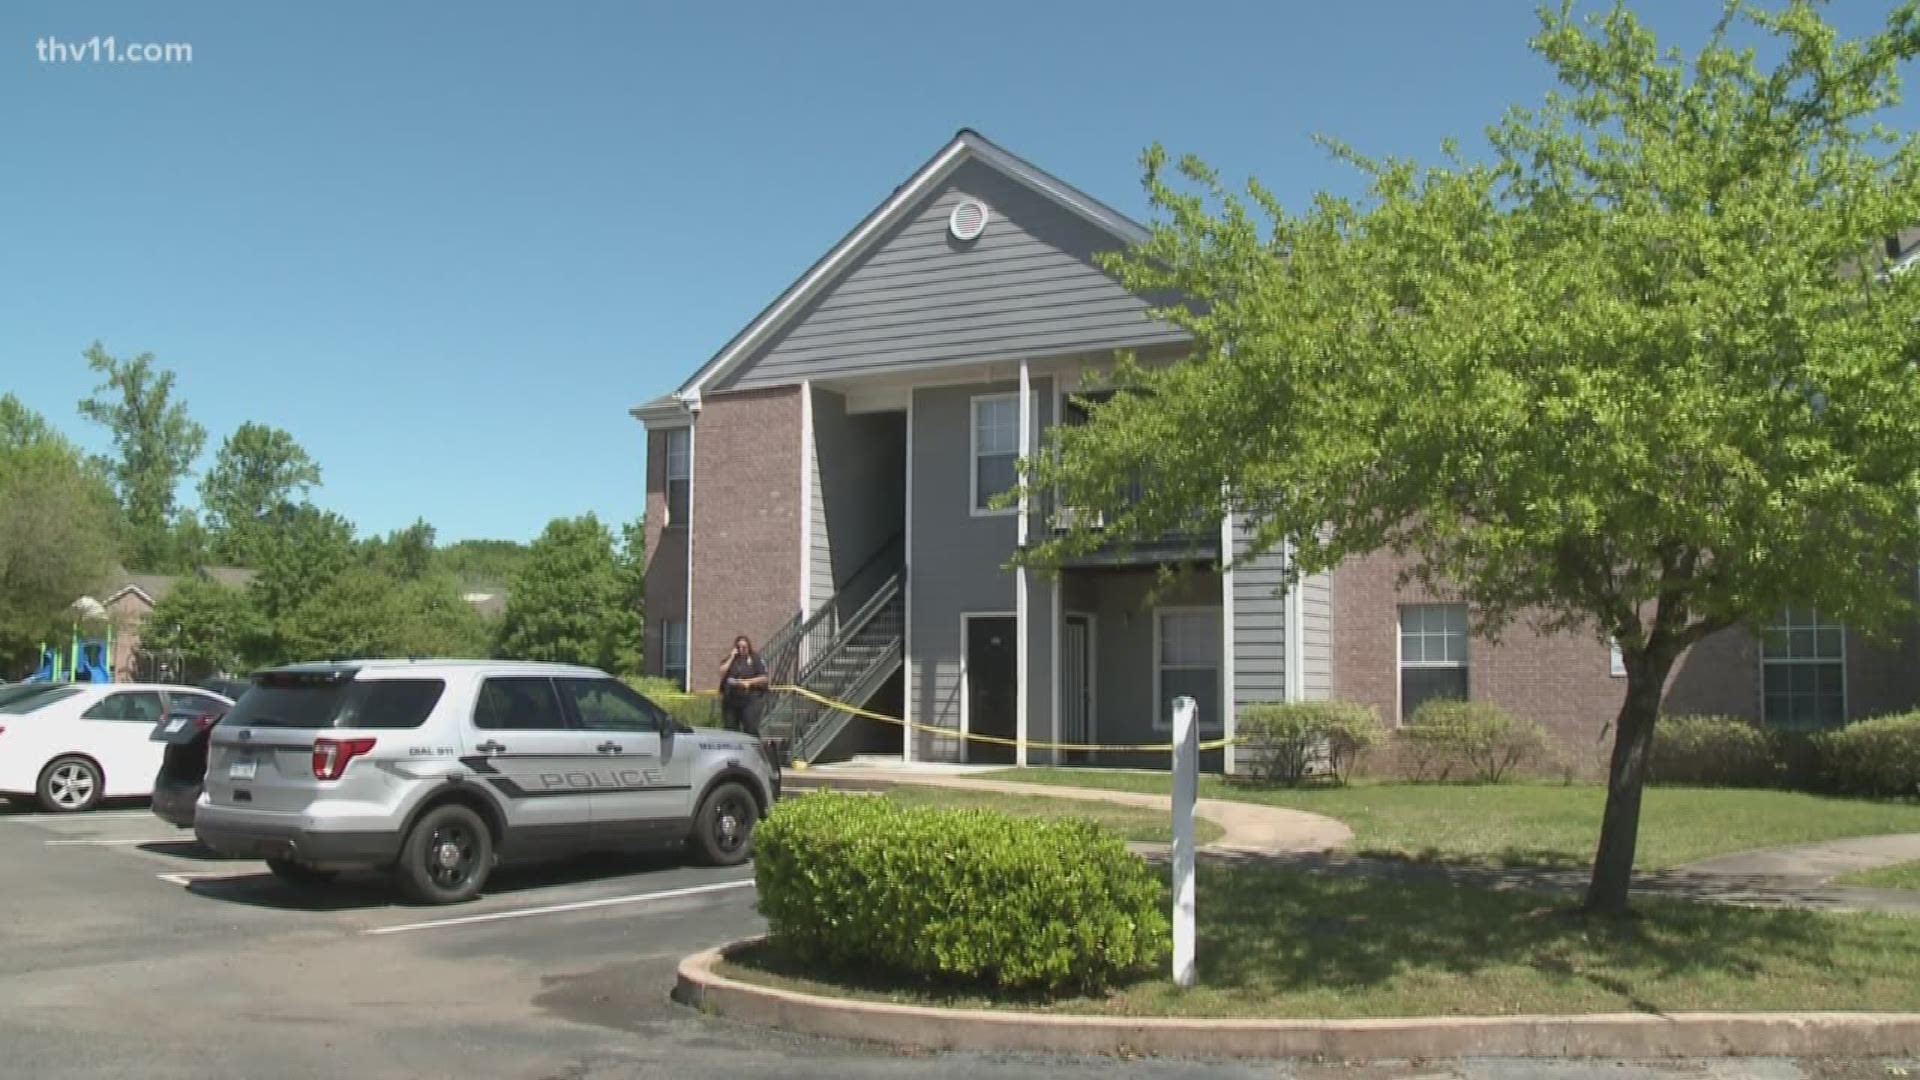 A 17-year-old boy is hospitalized after being shot in the head in Maumelle.